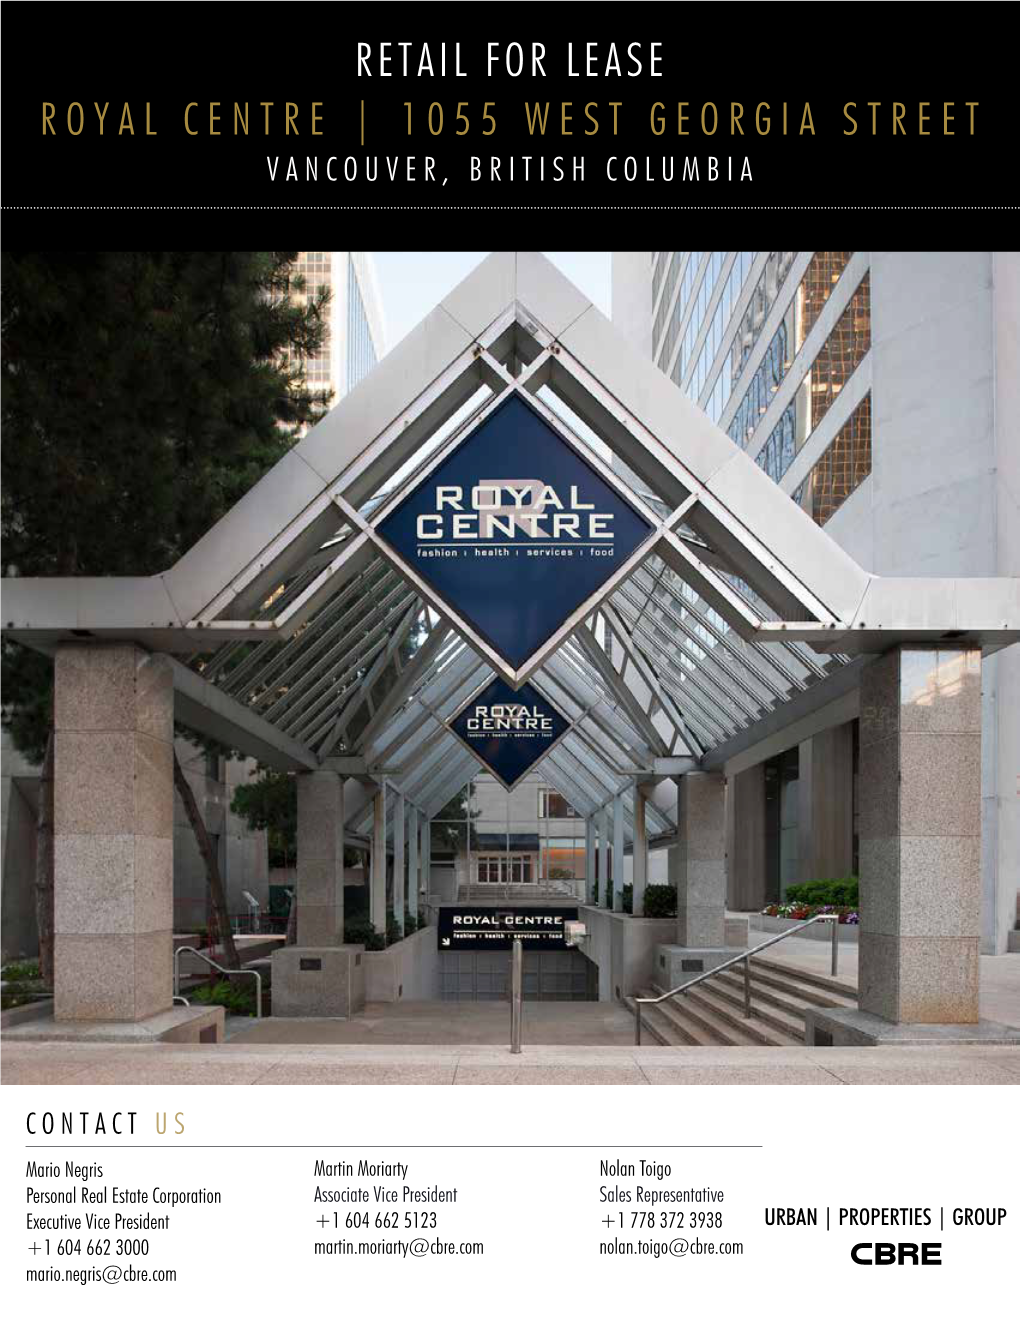 Retail for Lease Royal Centre | 1055 West Georgia Street Vancouver, British Columbia